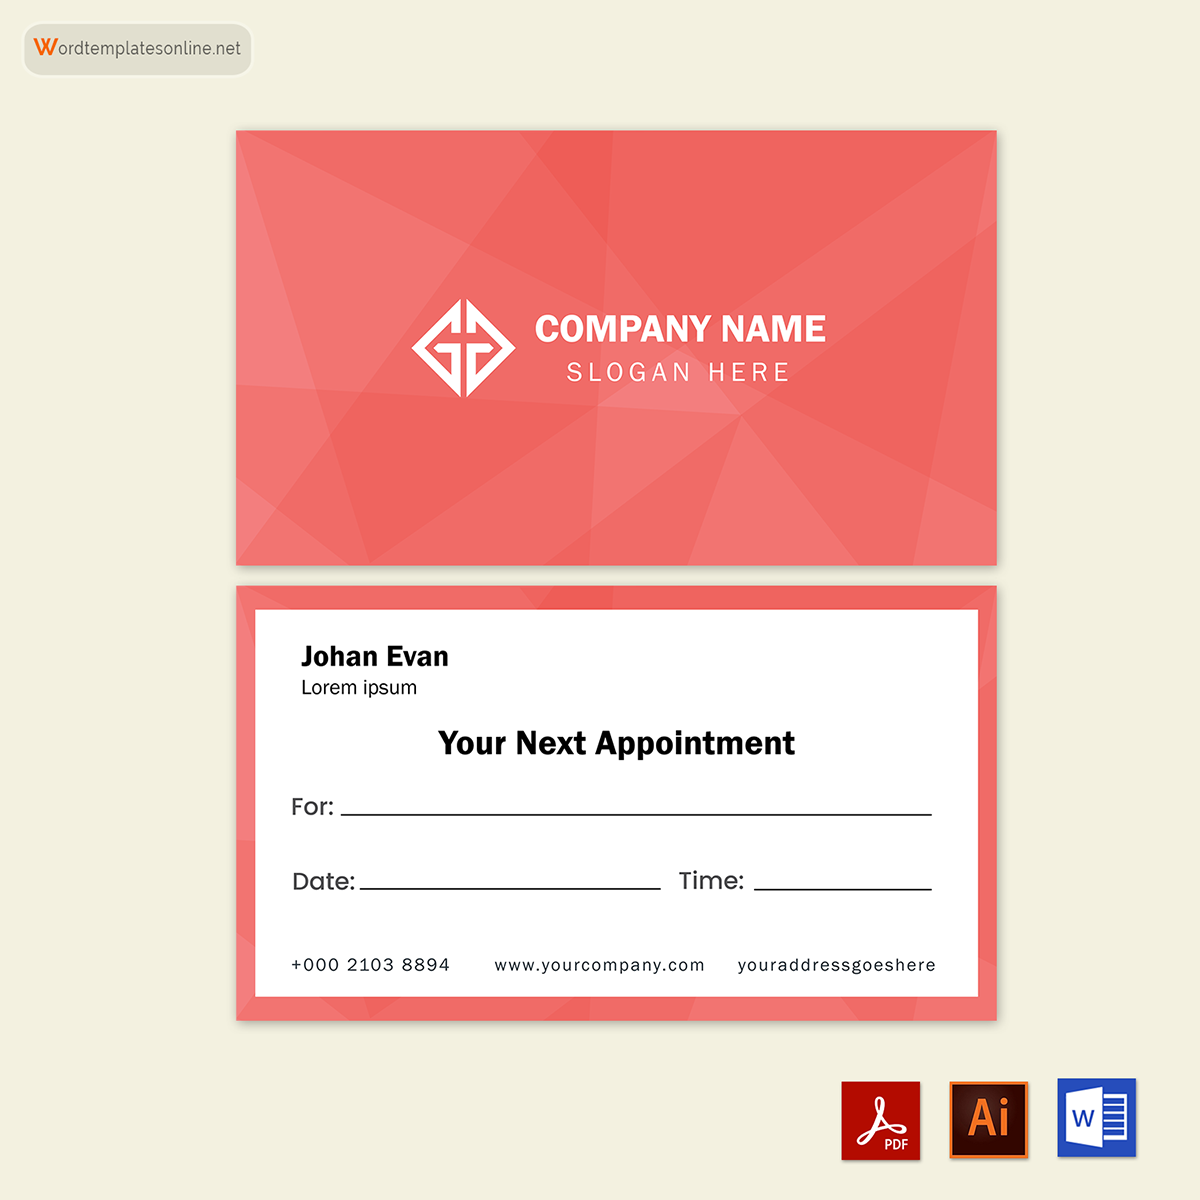 Printable Appointment Card Template - Editable Format